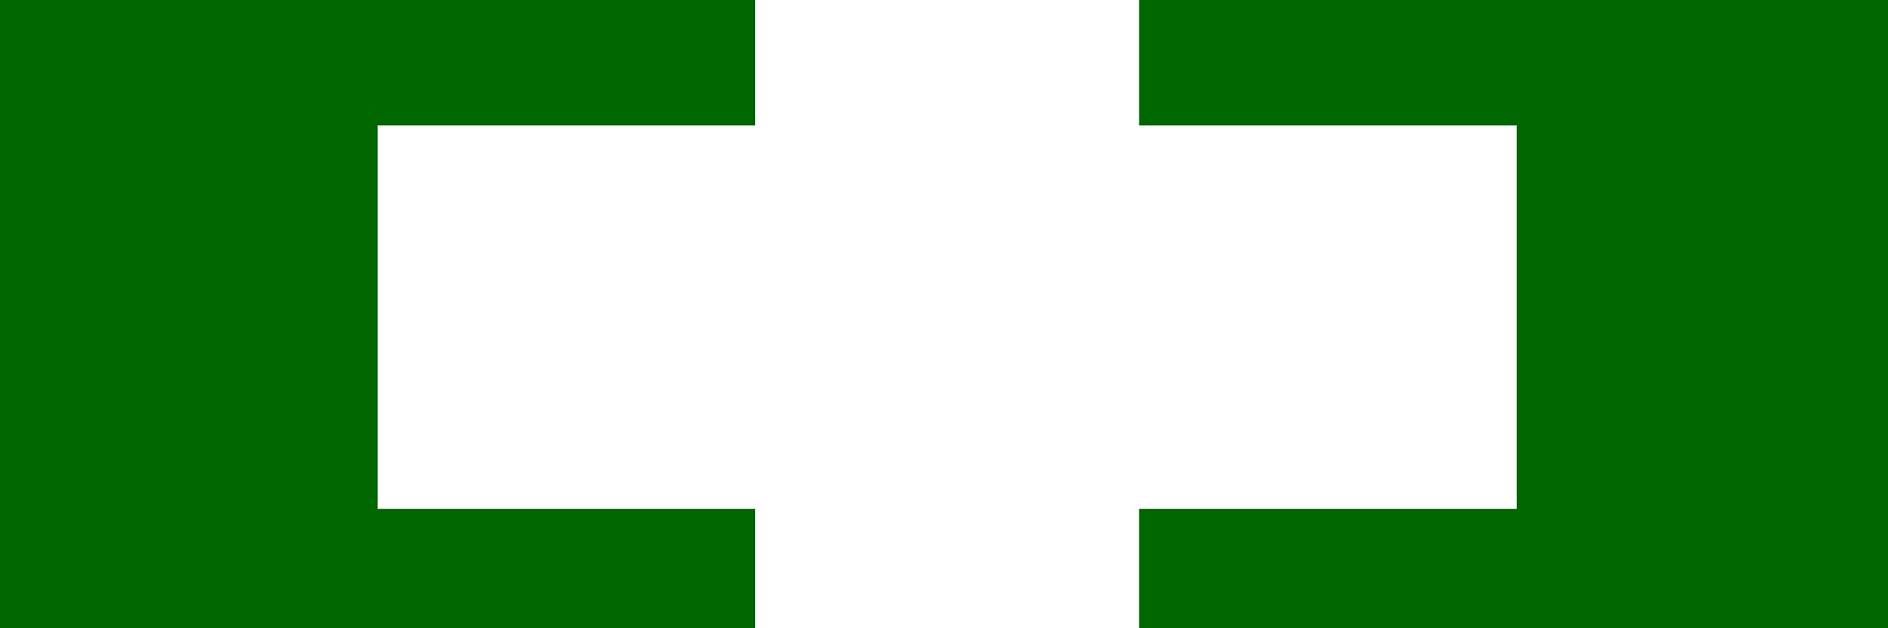 2000px-Flag_of_safety_and_health